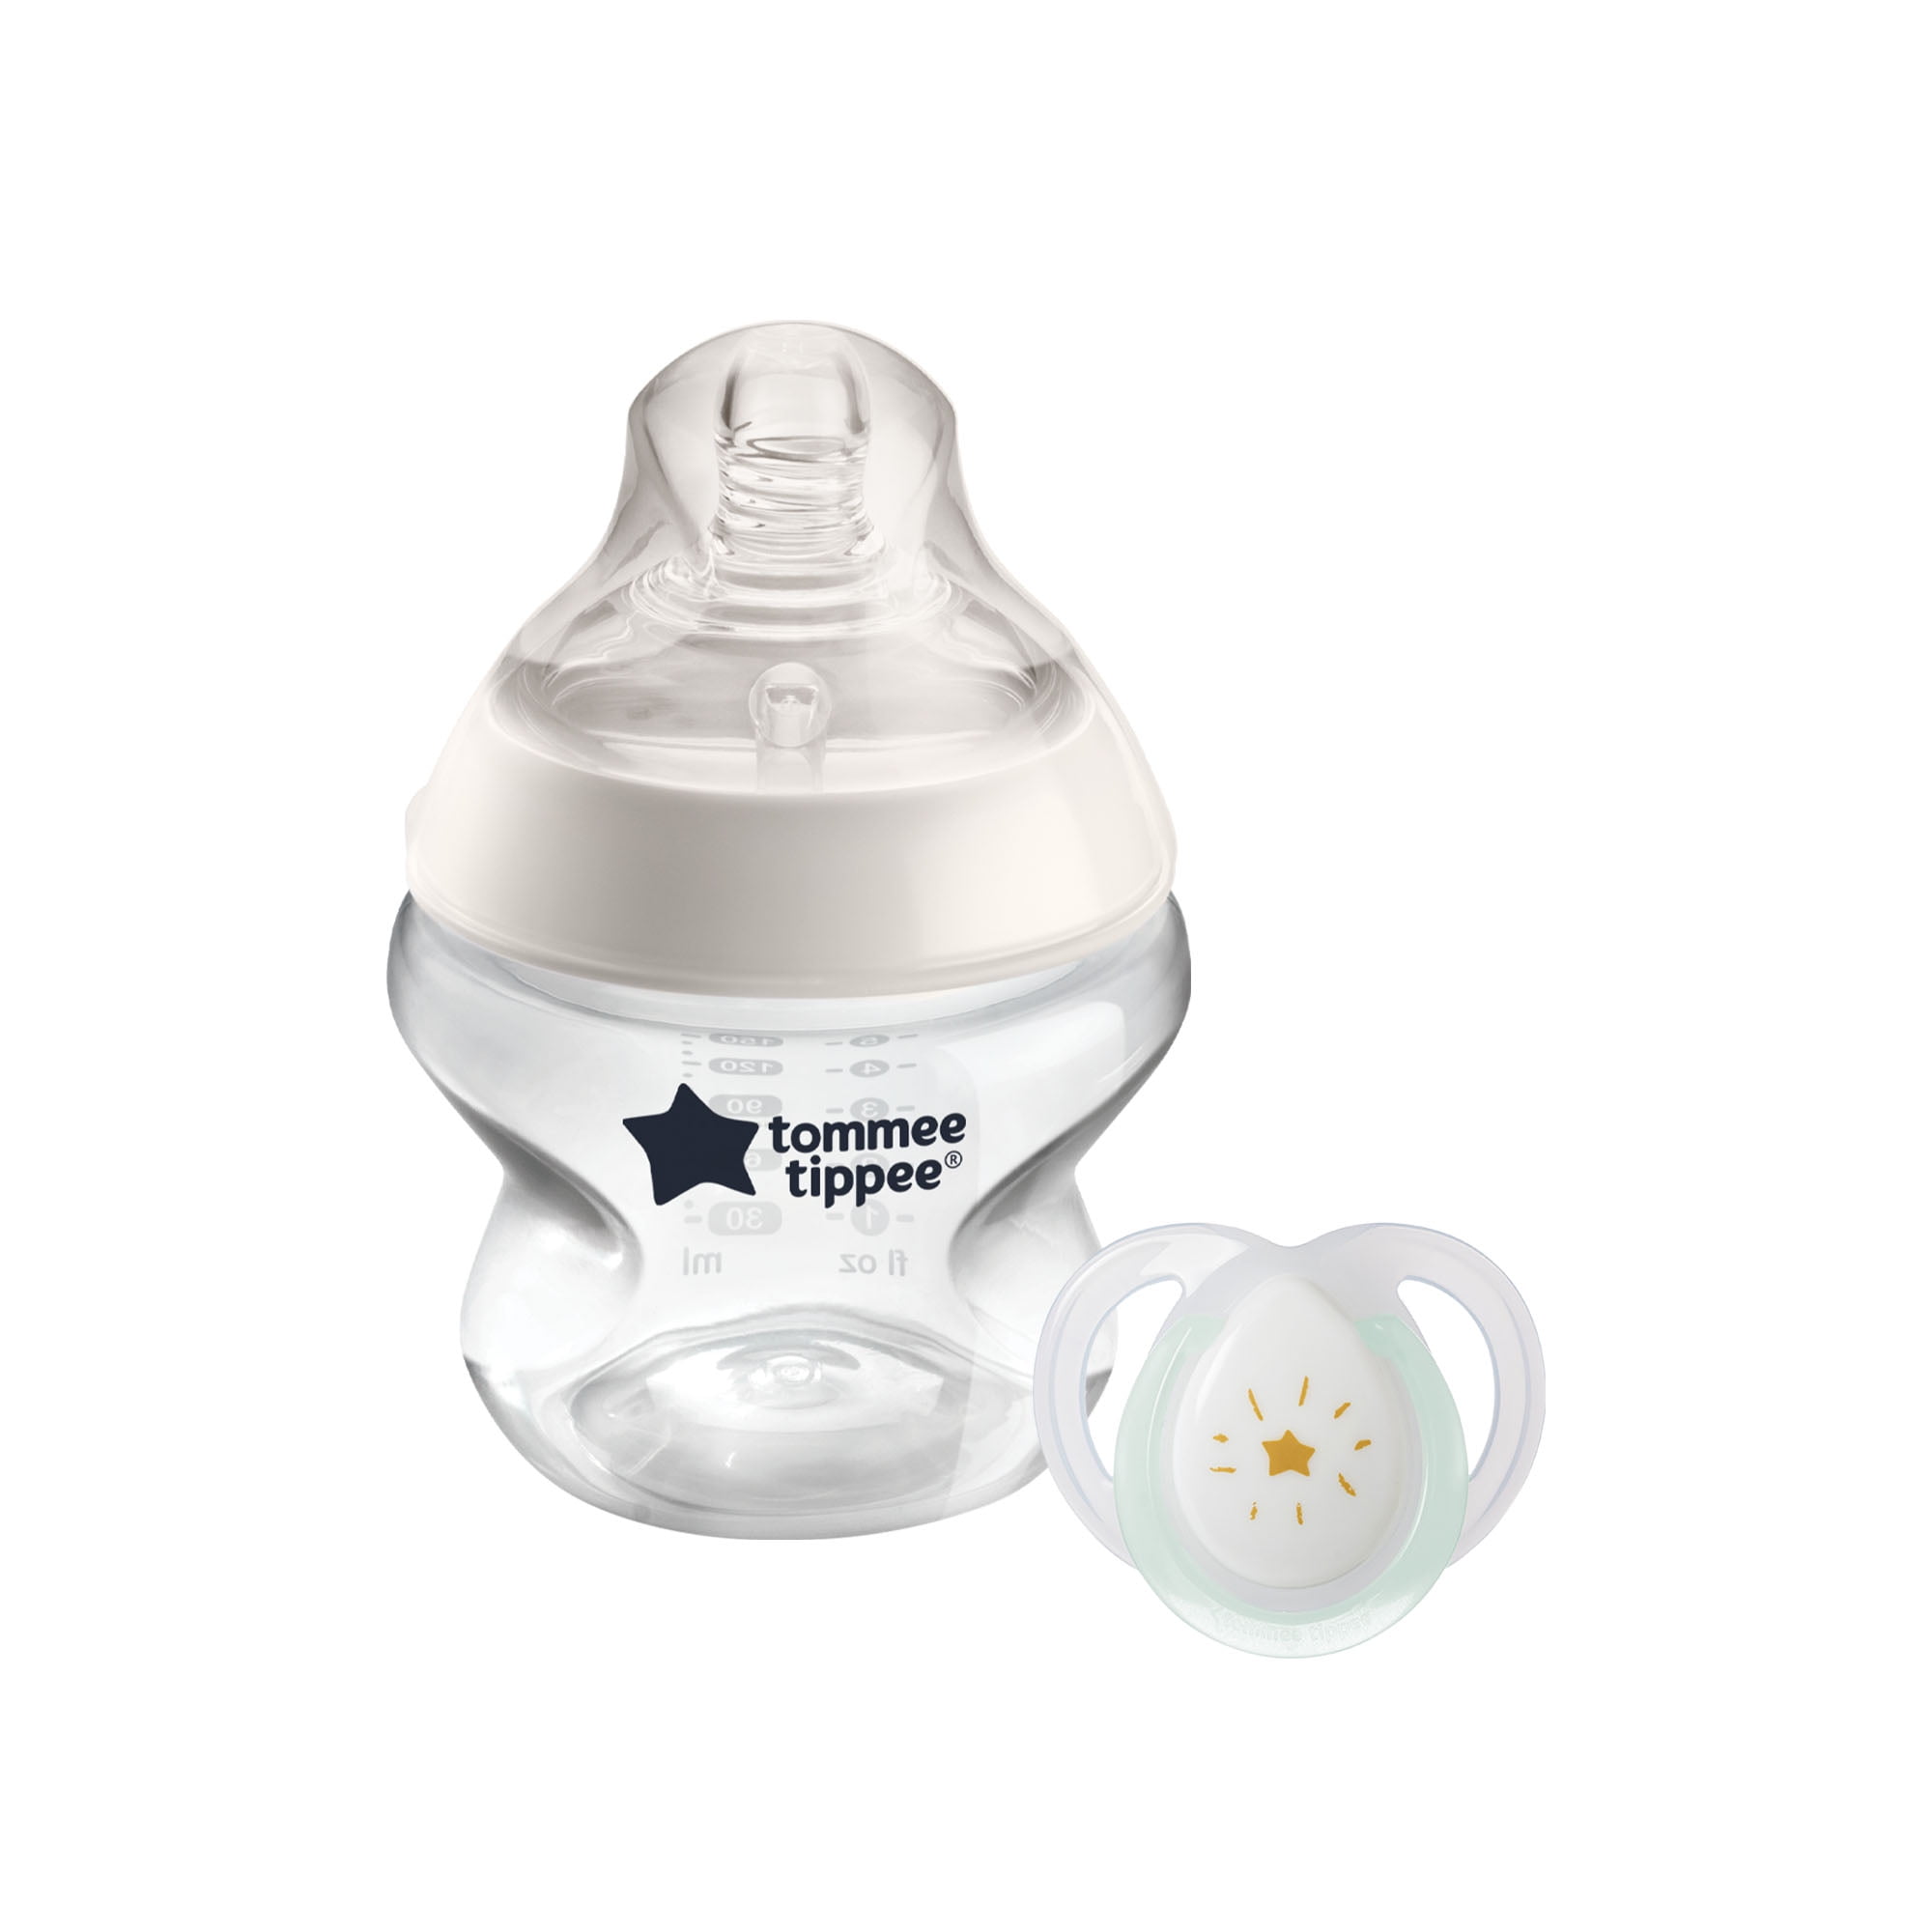 Tommee Tippee Closer to Nature Baby Bottle (5oz, 1 Count) | Newborn Pacifier (0-2 Months)